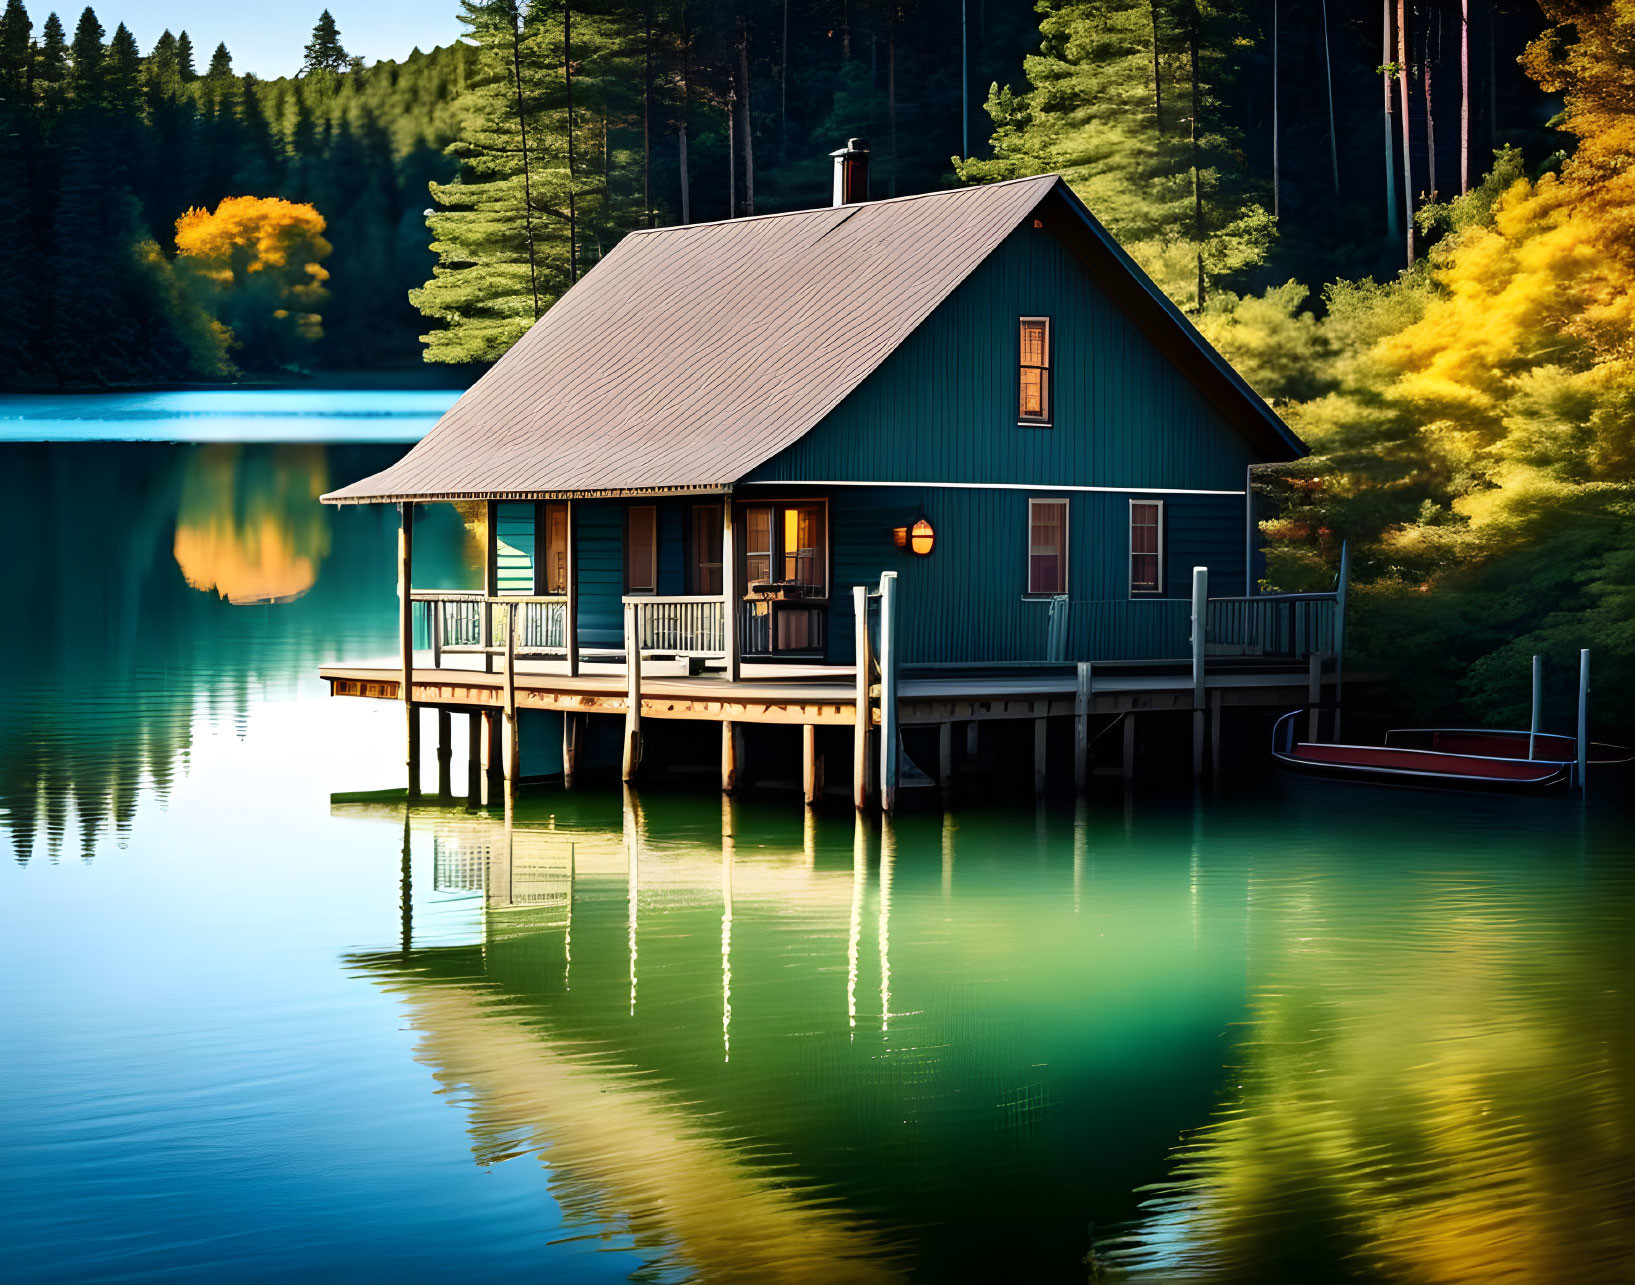 Tranquil Lakeside Cabin with Deck Over Calm Waters